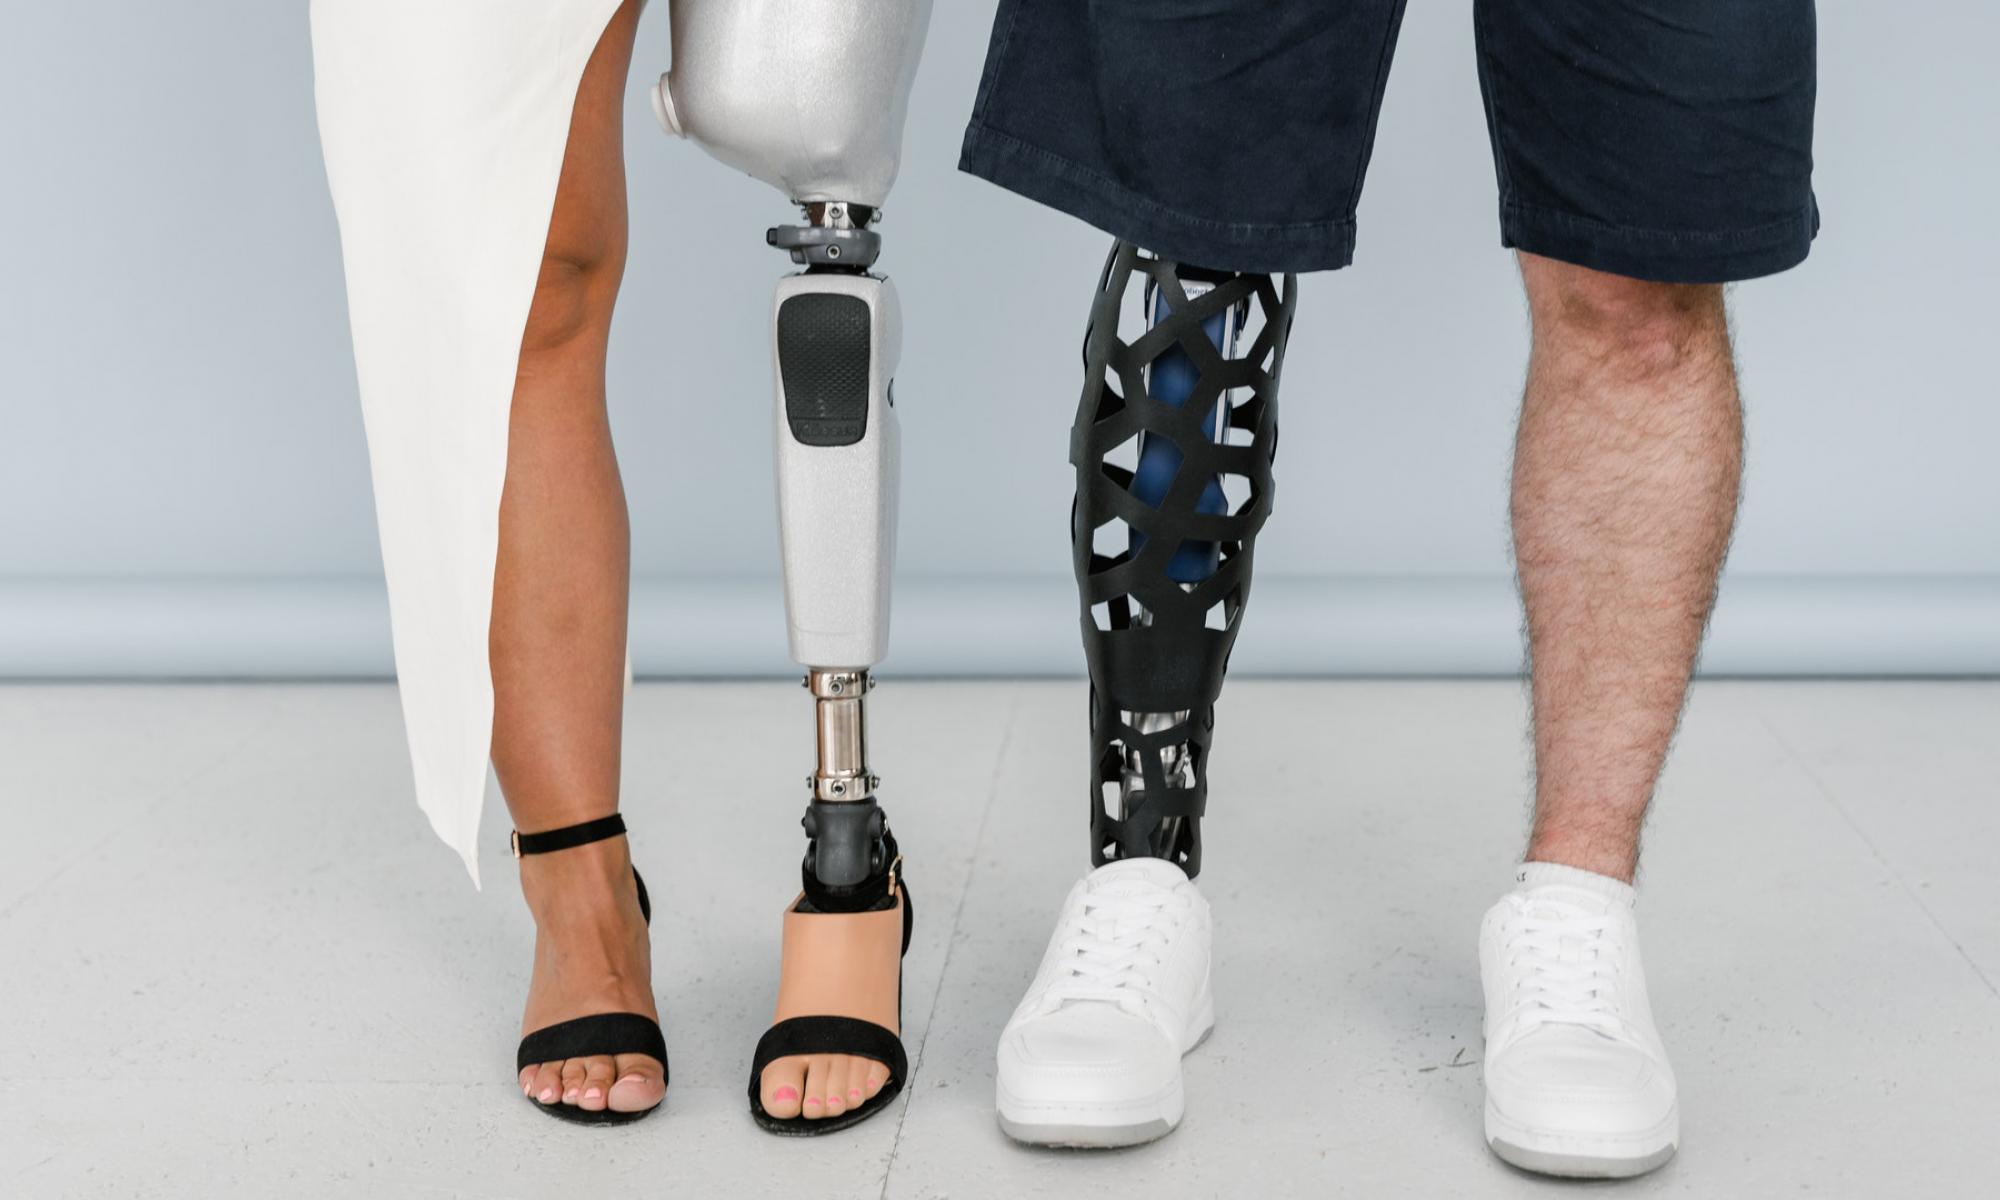 Two pairs of legs of a man (right) and woman (left) side by side, where one leg of each person is a prosthetic leg.